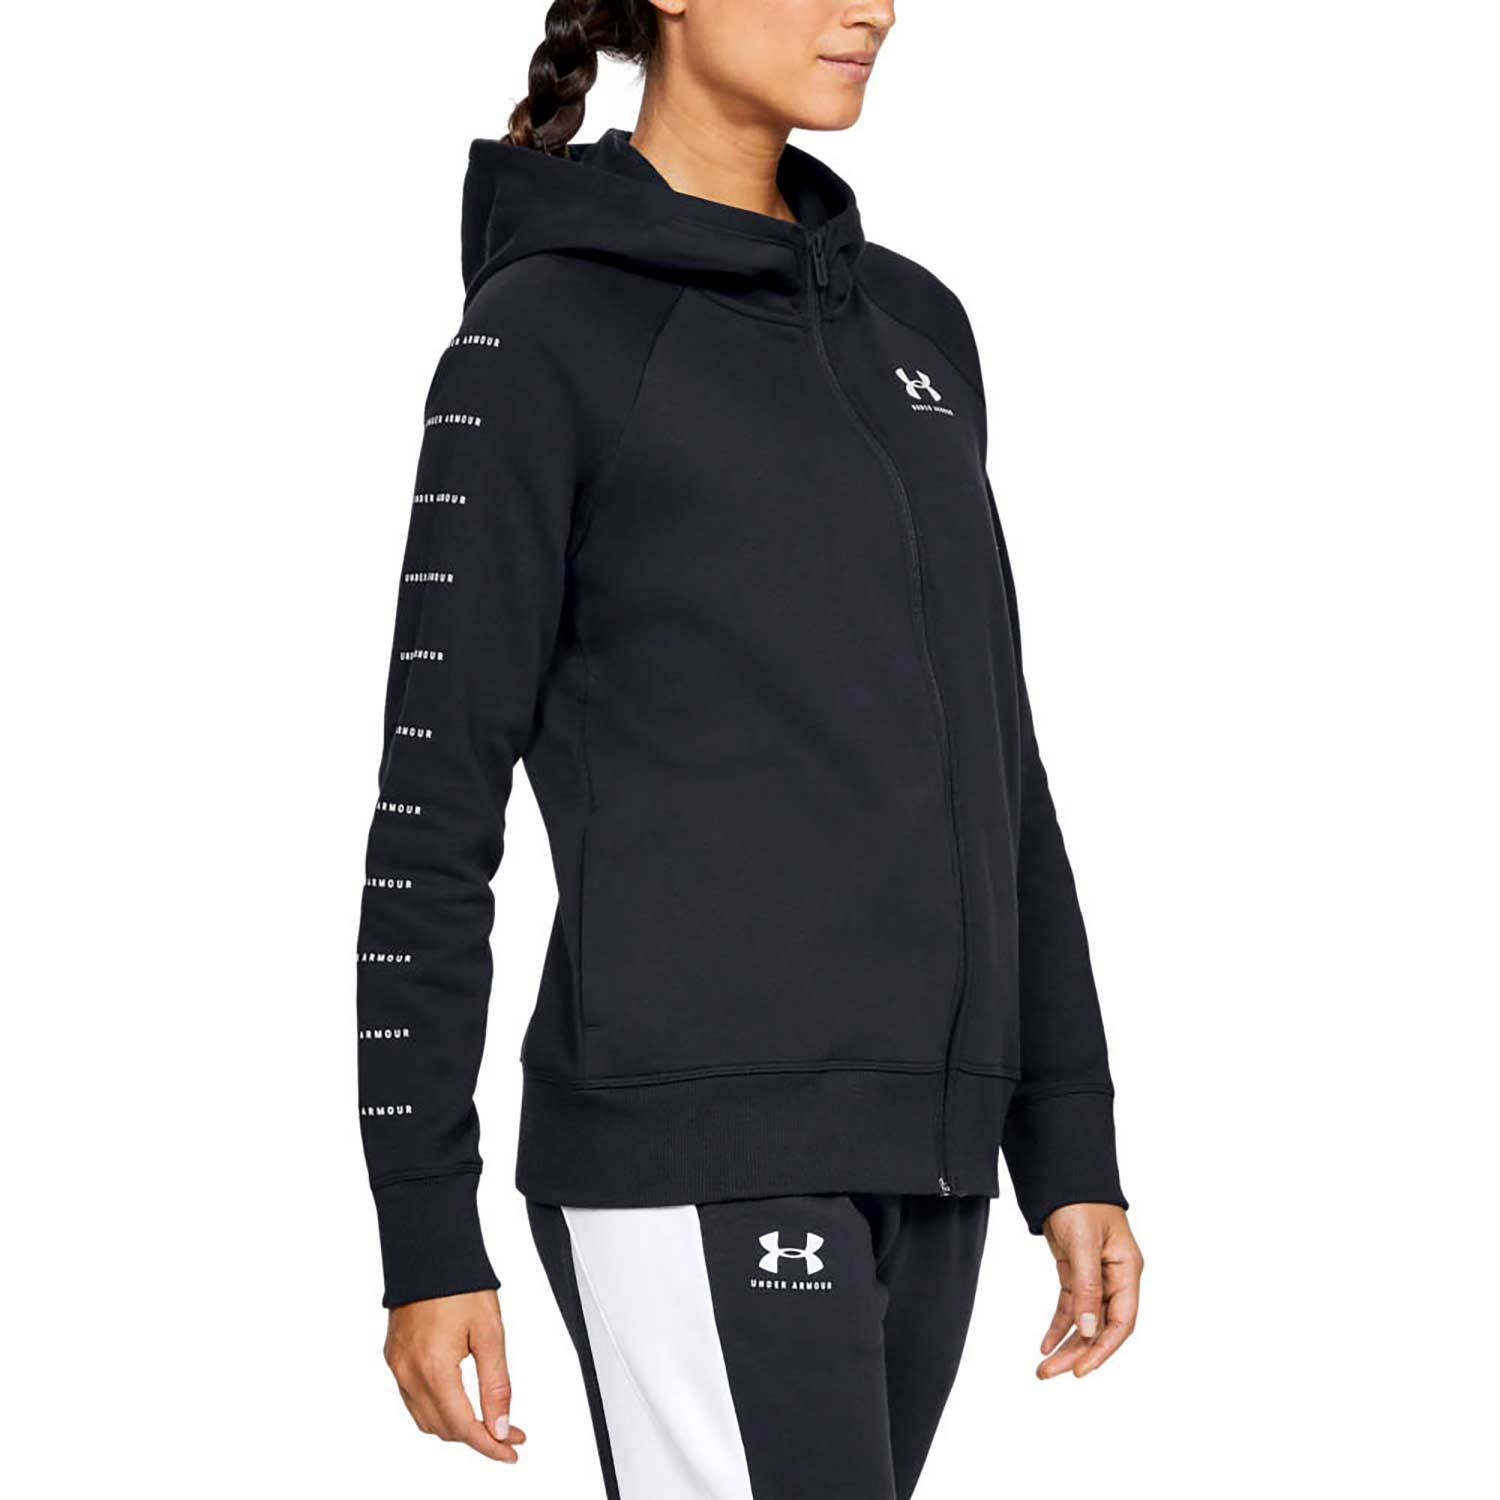 womens under armour zip up